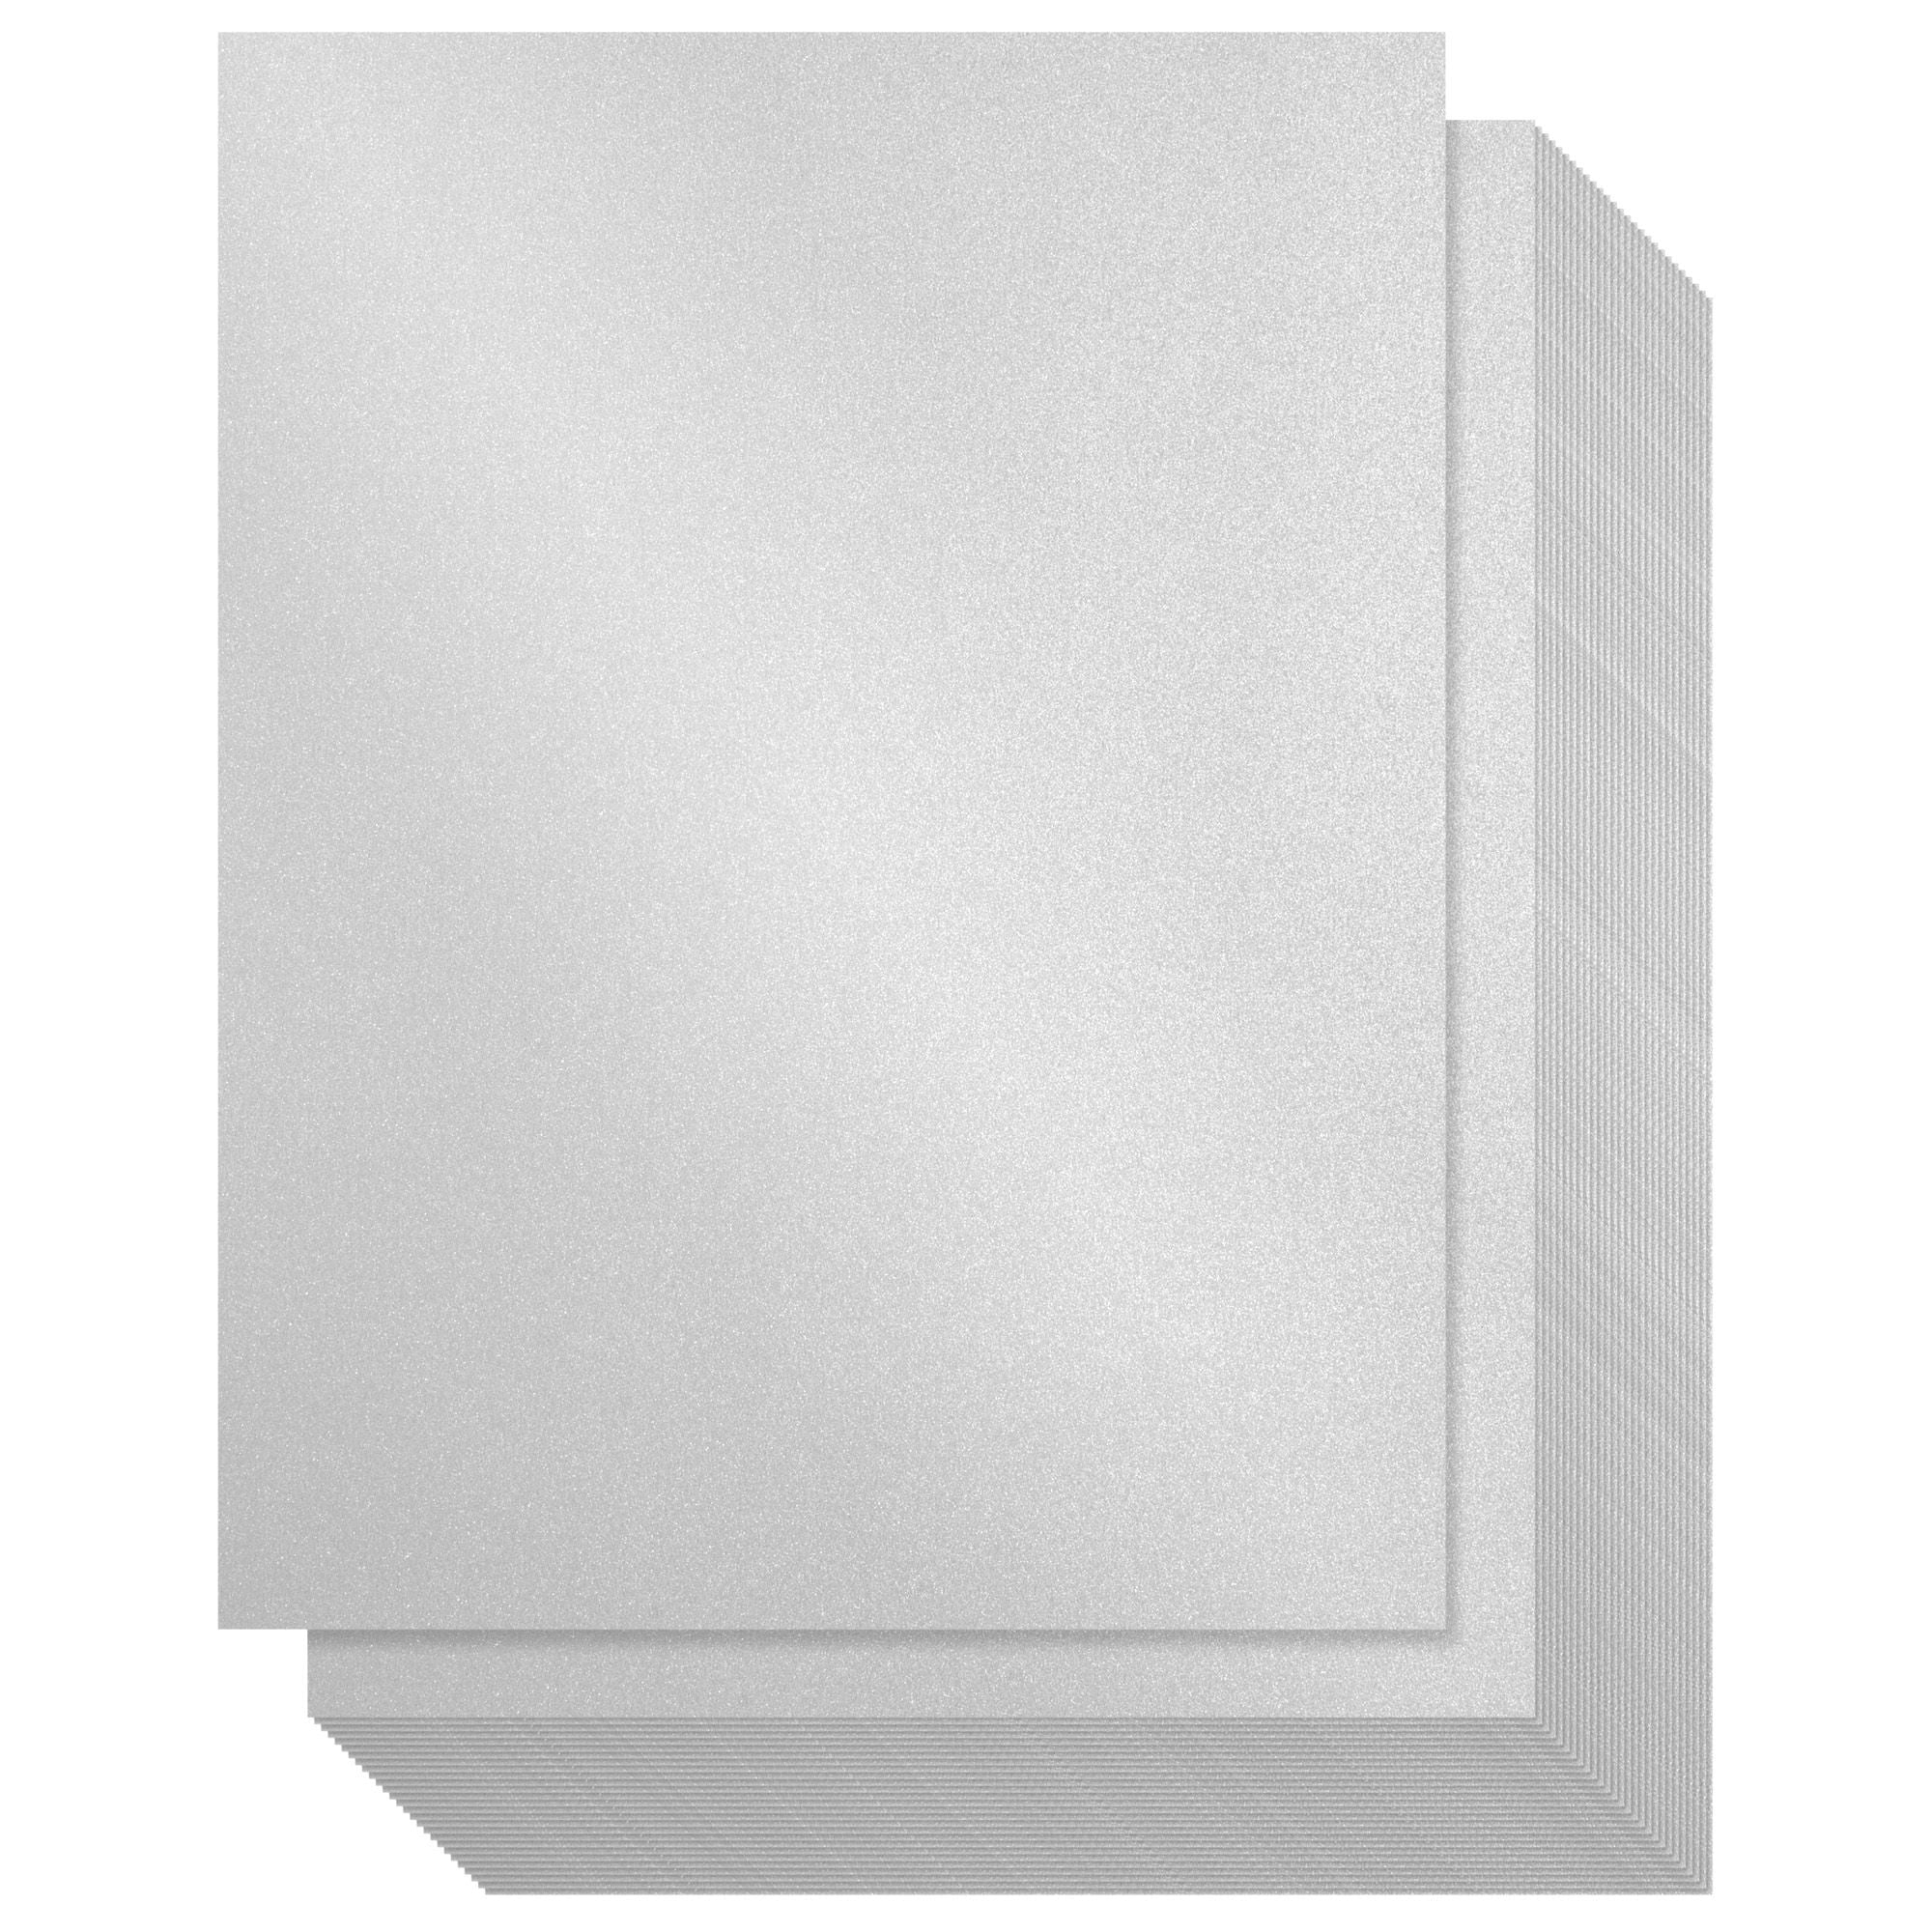  300 Sheets Mixed Cardstock Paper 8.5 x 11 Inch, Black&White  Card Stock Paper,180gsm/65lb Thick Cardstock Printer Paper, Blank Heavy  Card Paper for Invitations, Greeting Cards Making, Postcards, Photos : Arts